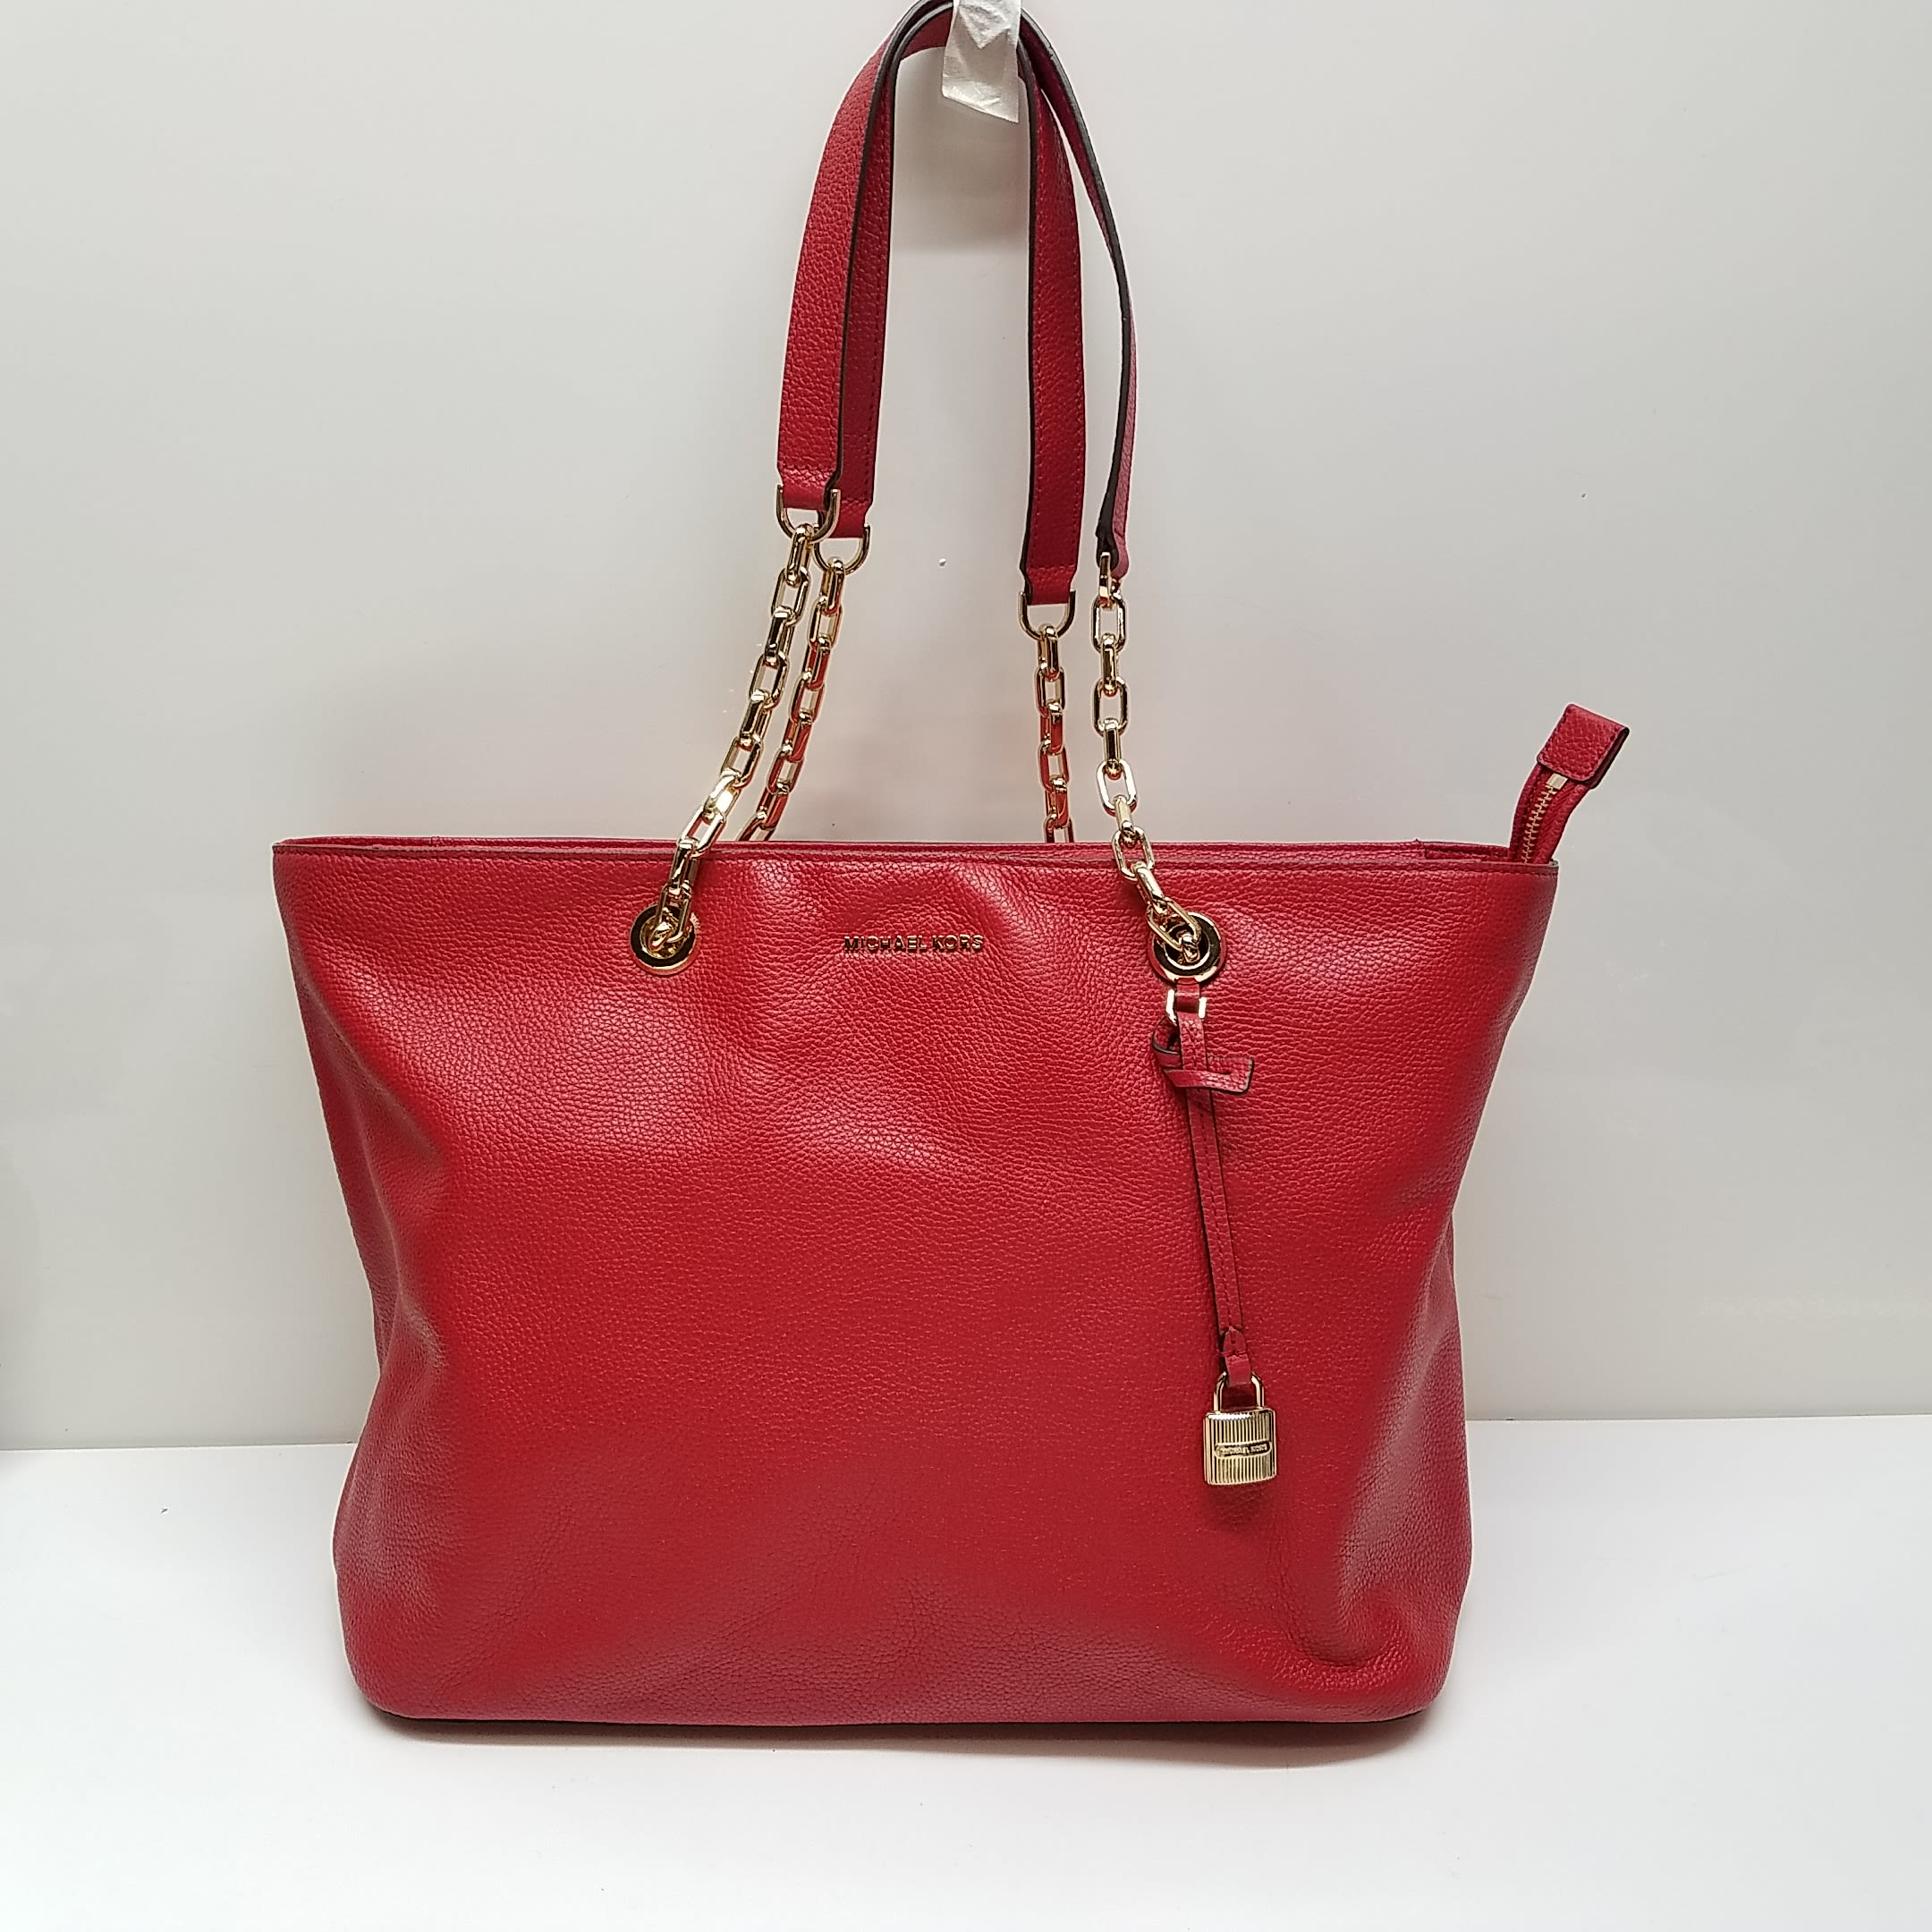 NWT Michael Kors Mercer Chain Bright Red Tote Leather